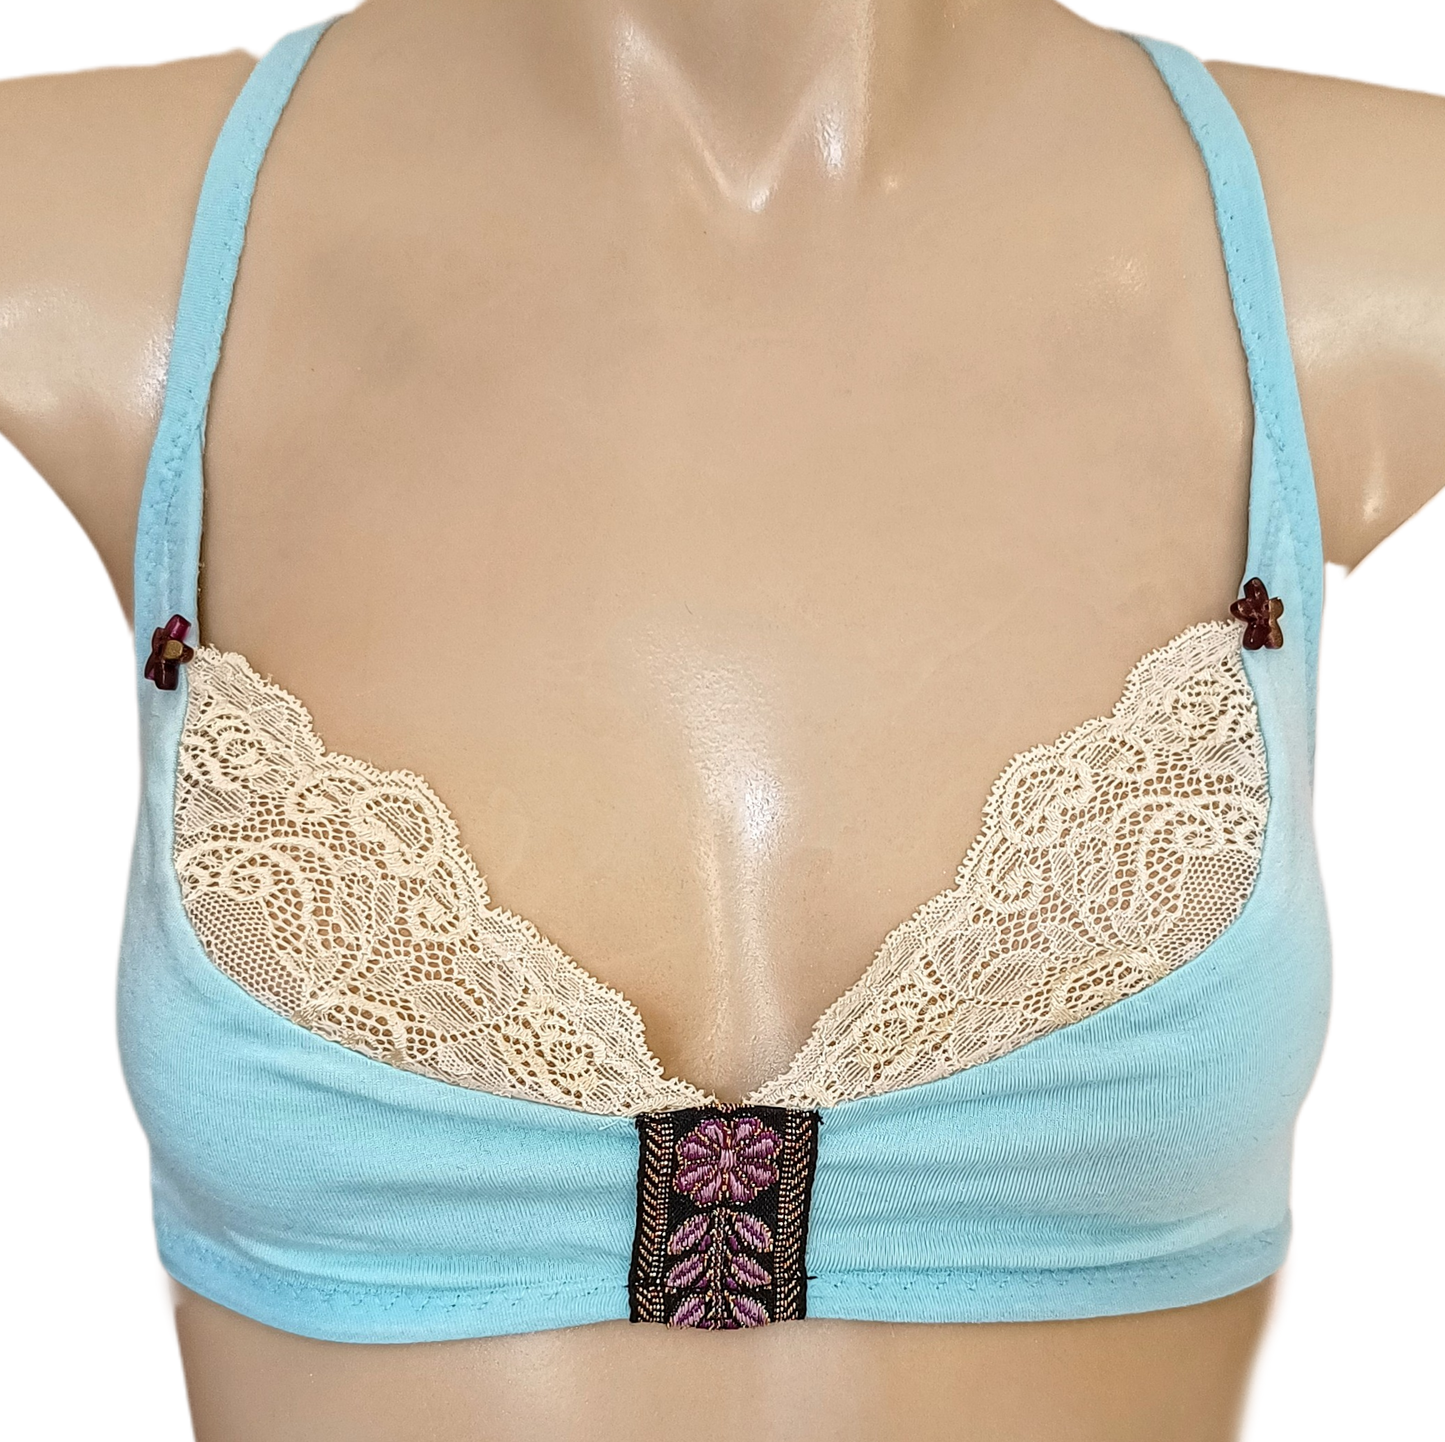 Sample Bralette #5 - size M - Discover Comfort and Charm